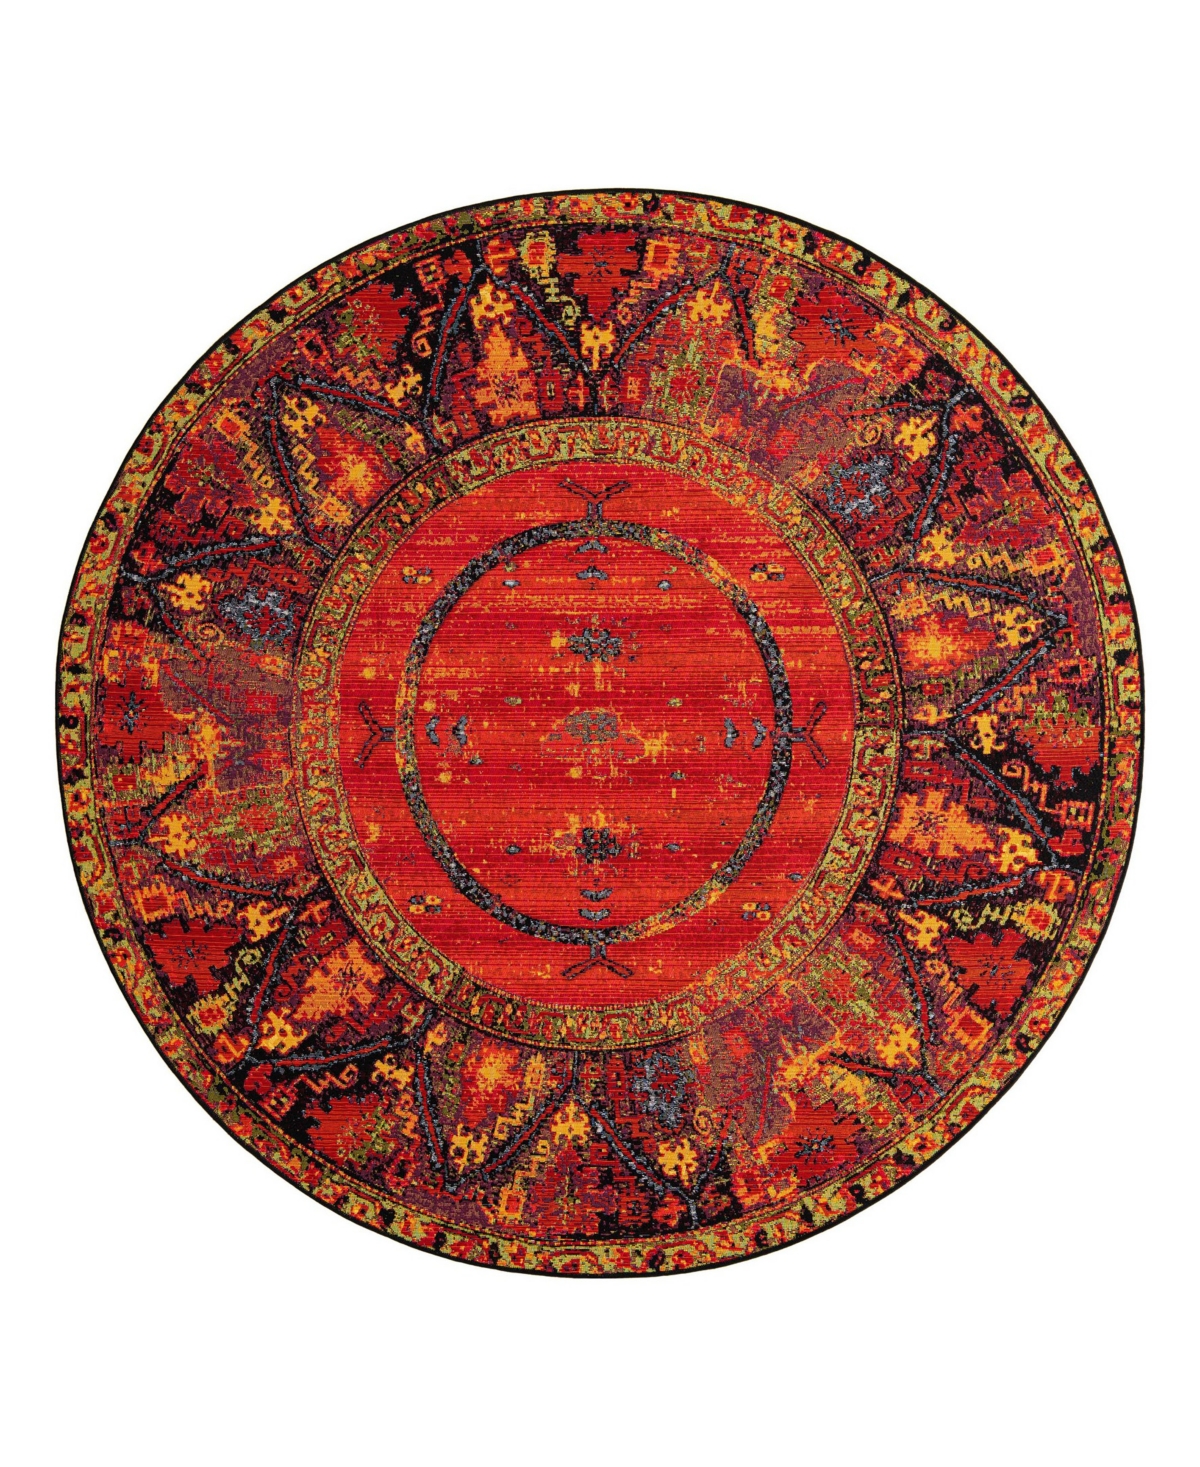 Bayshore Home Oushak Outdoor Ous01 7'10" X 7'10" Round Area Rug In Multi